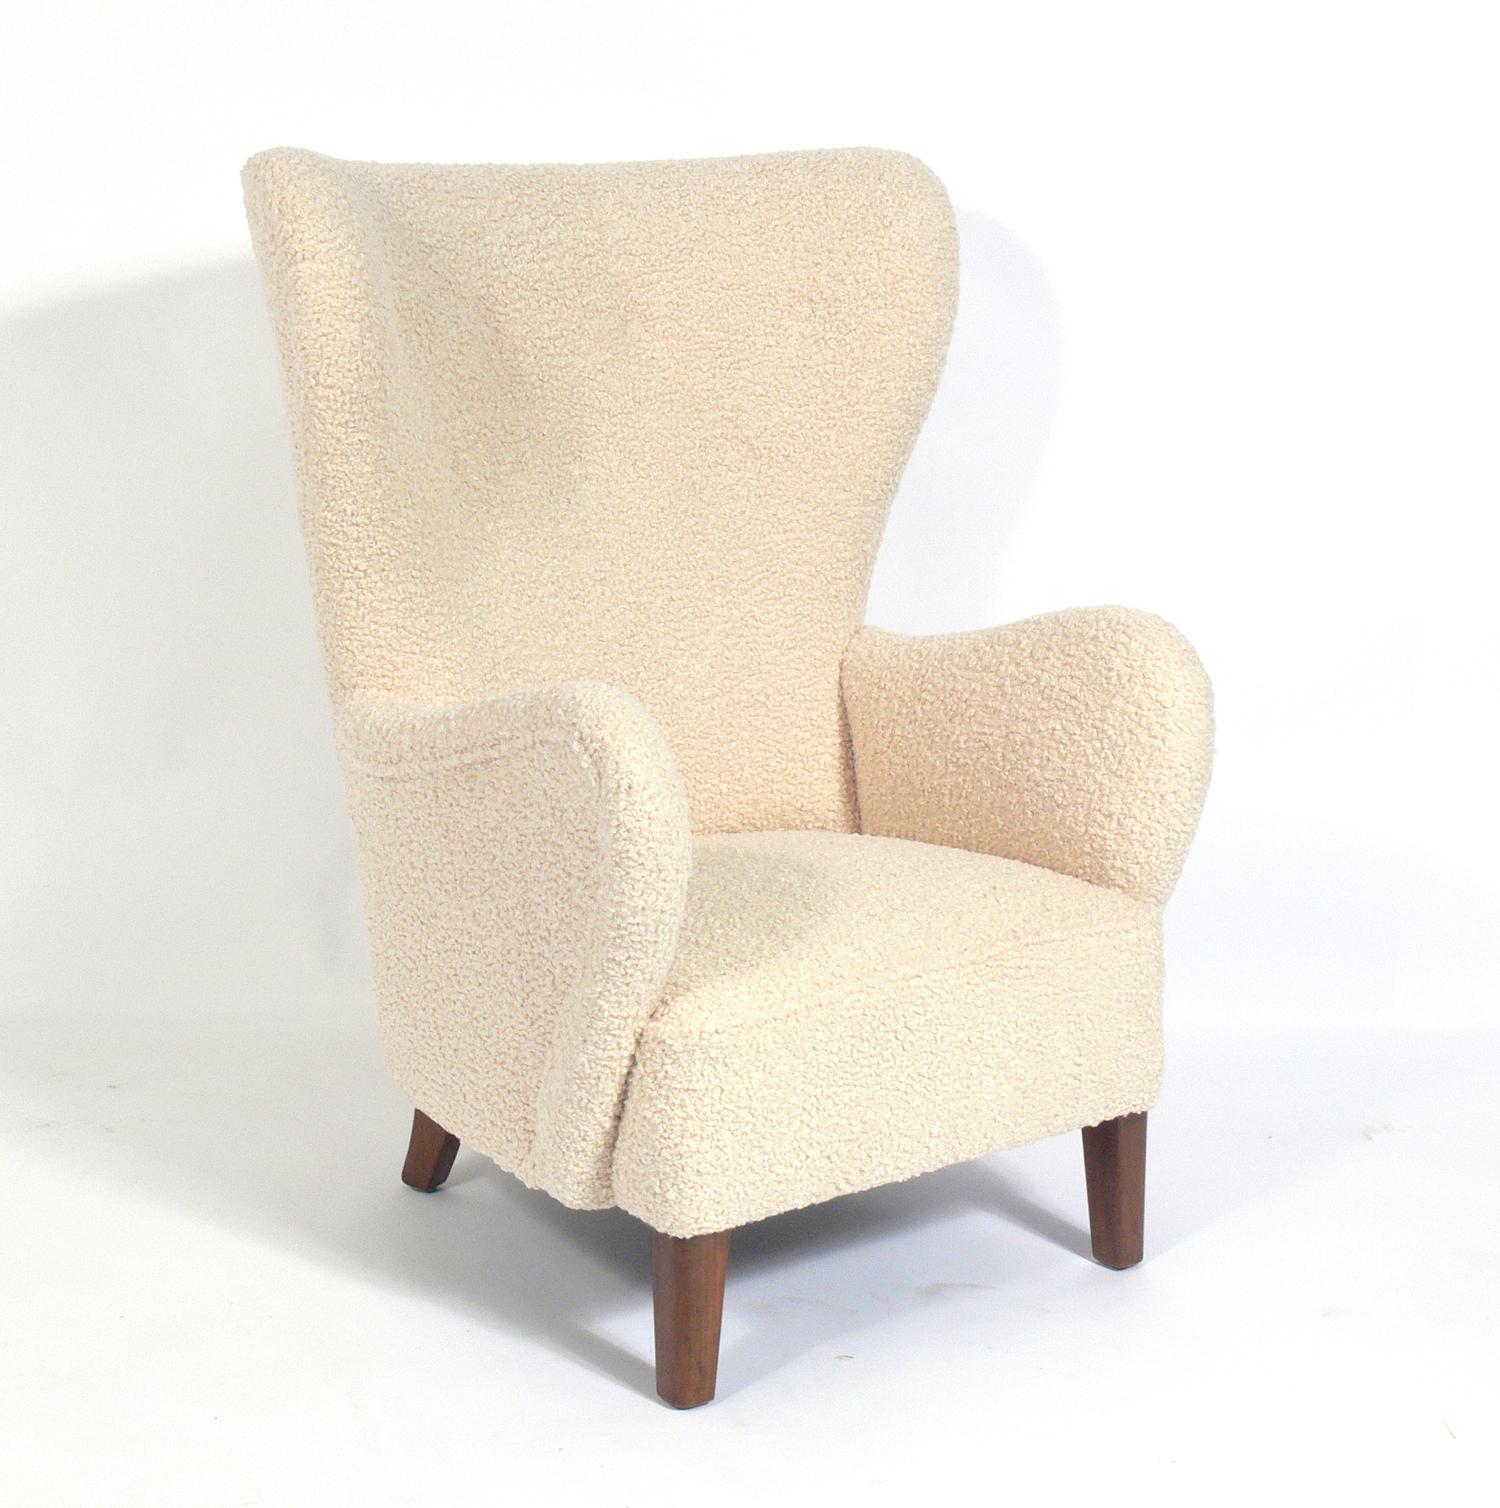 Danish modern lounge chair, designed by Fritz Hansen, Denmark, circa 1940s. It has been reupholstered in a plush faux shearling fabric. The wood legs, believed to be beech, have been cleaned and Danish oiled.